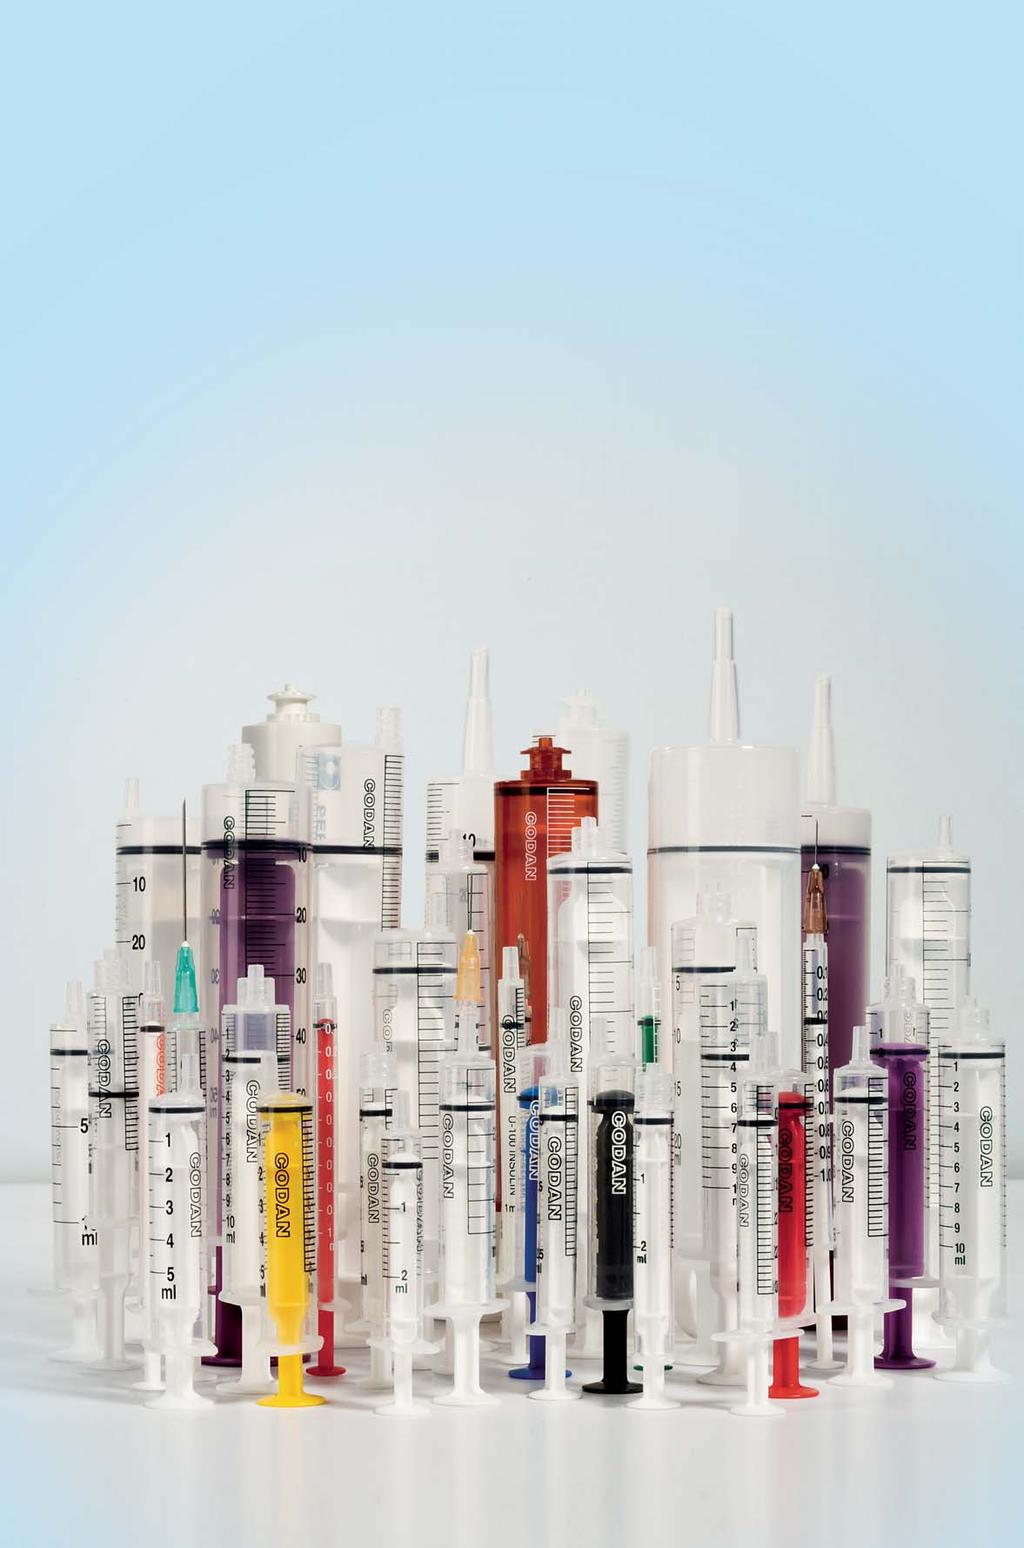 Product Portfolio The product portfolio covers an extensive line of disposable syringes for a broad range of medical applications.